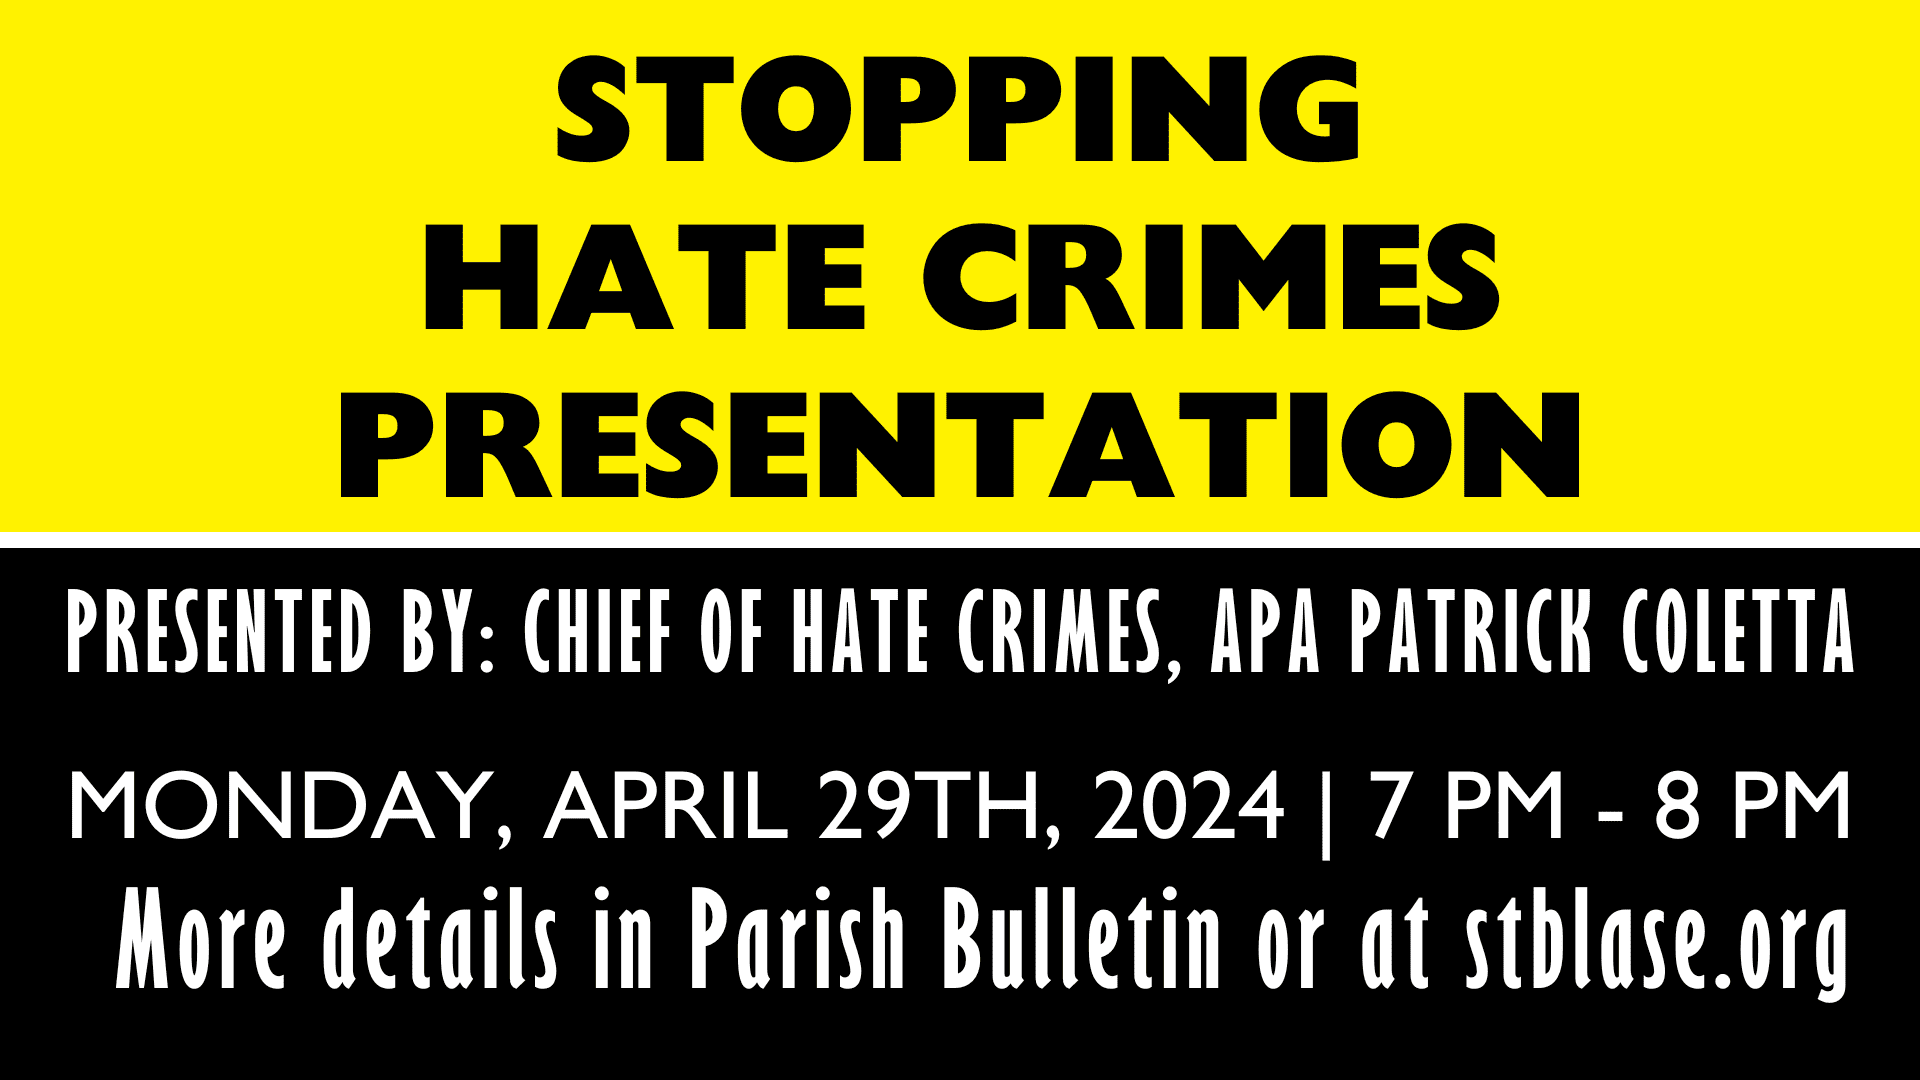 Adult Faith Formation: Stopping Hate Crimes Presentation